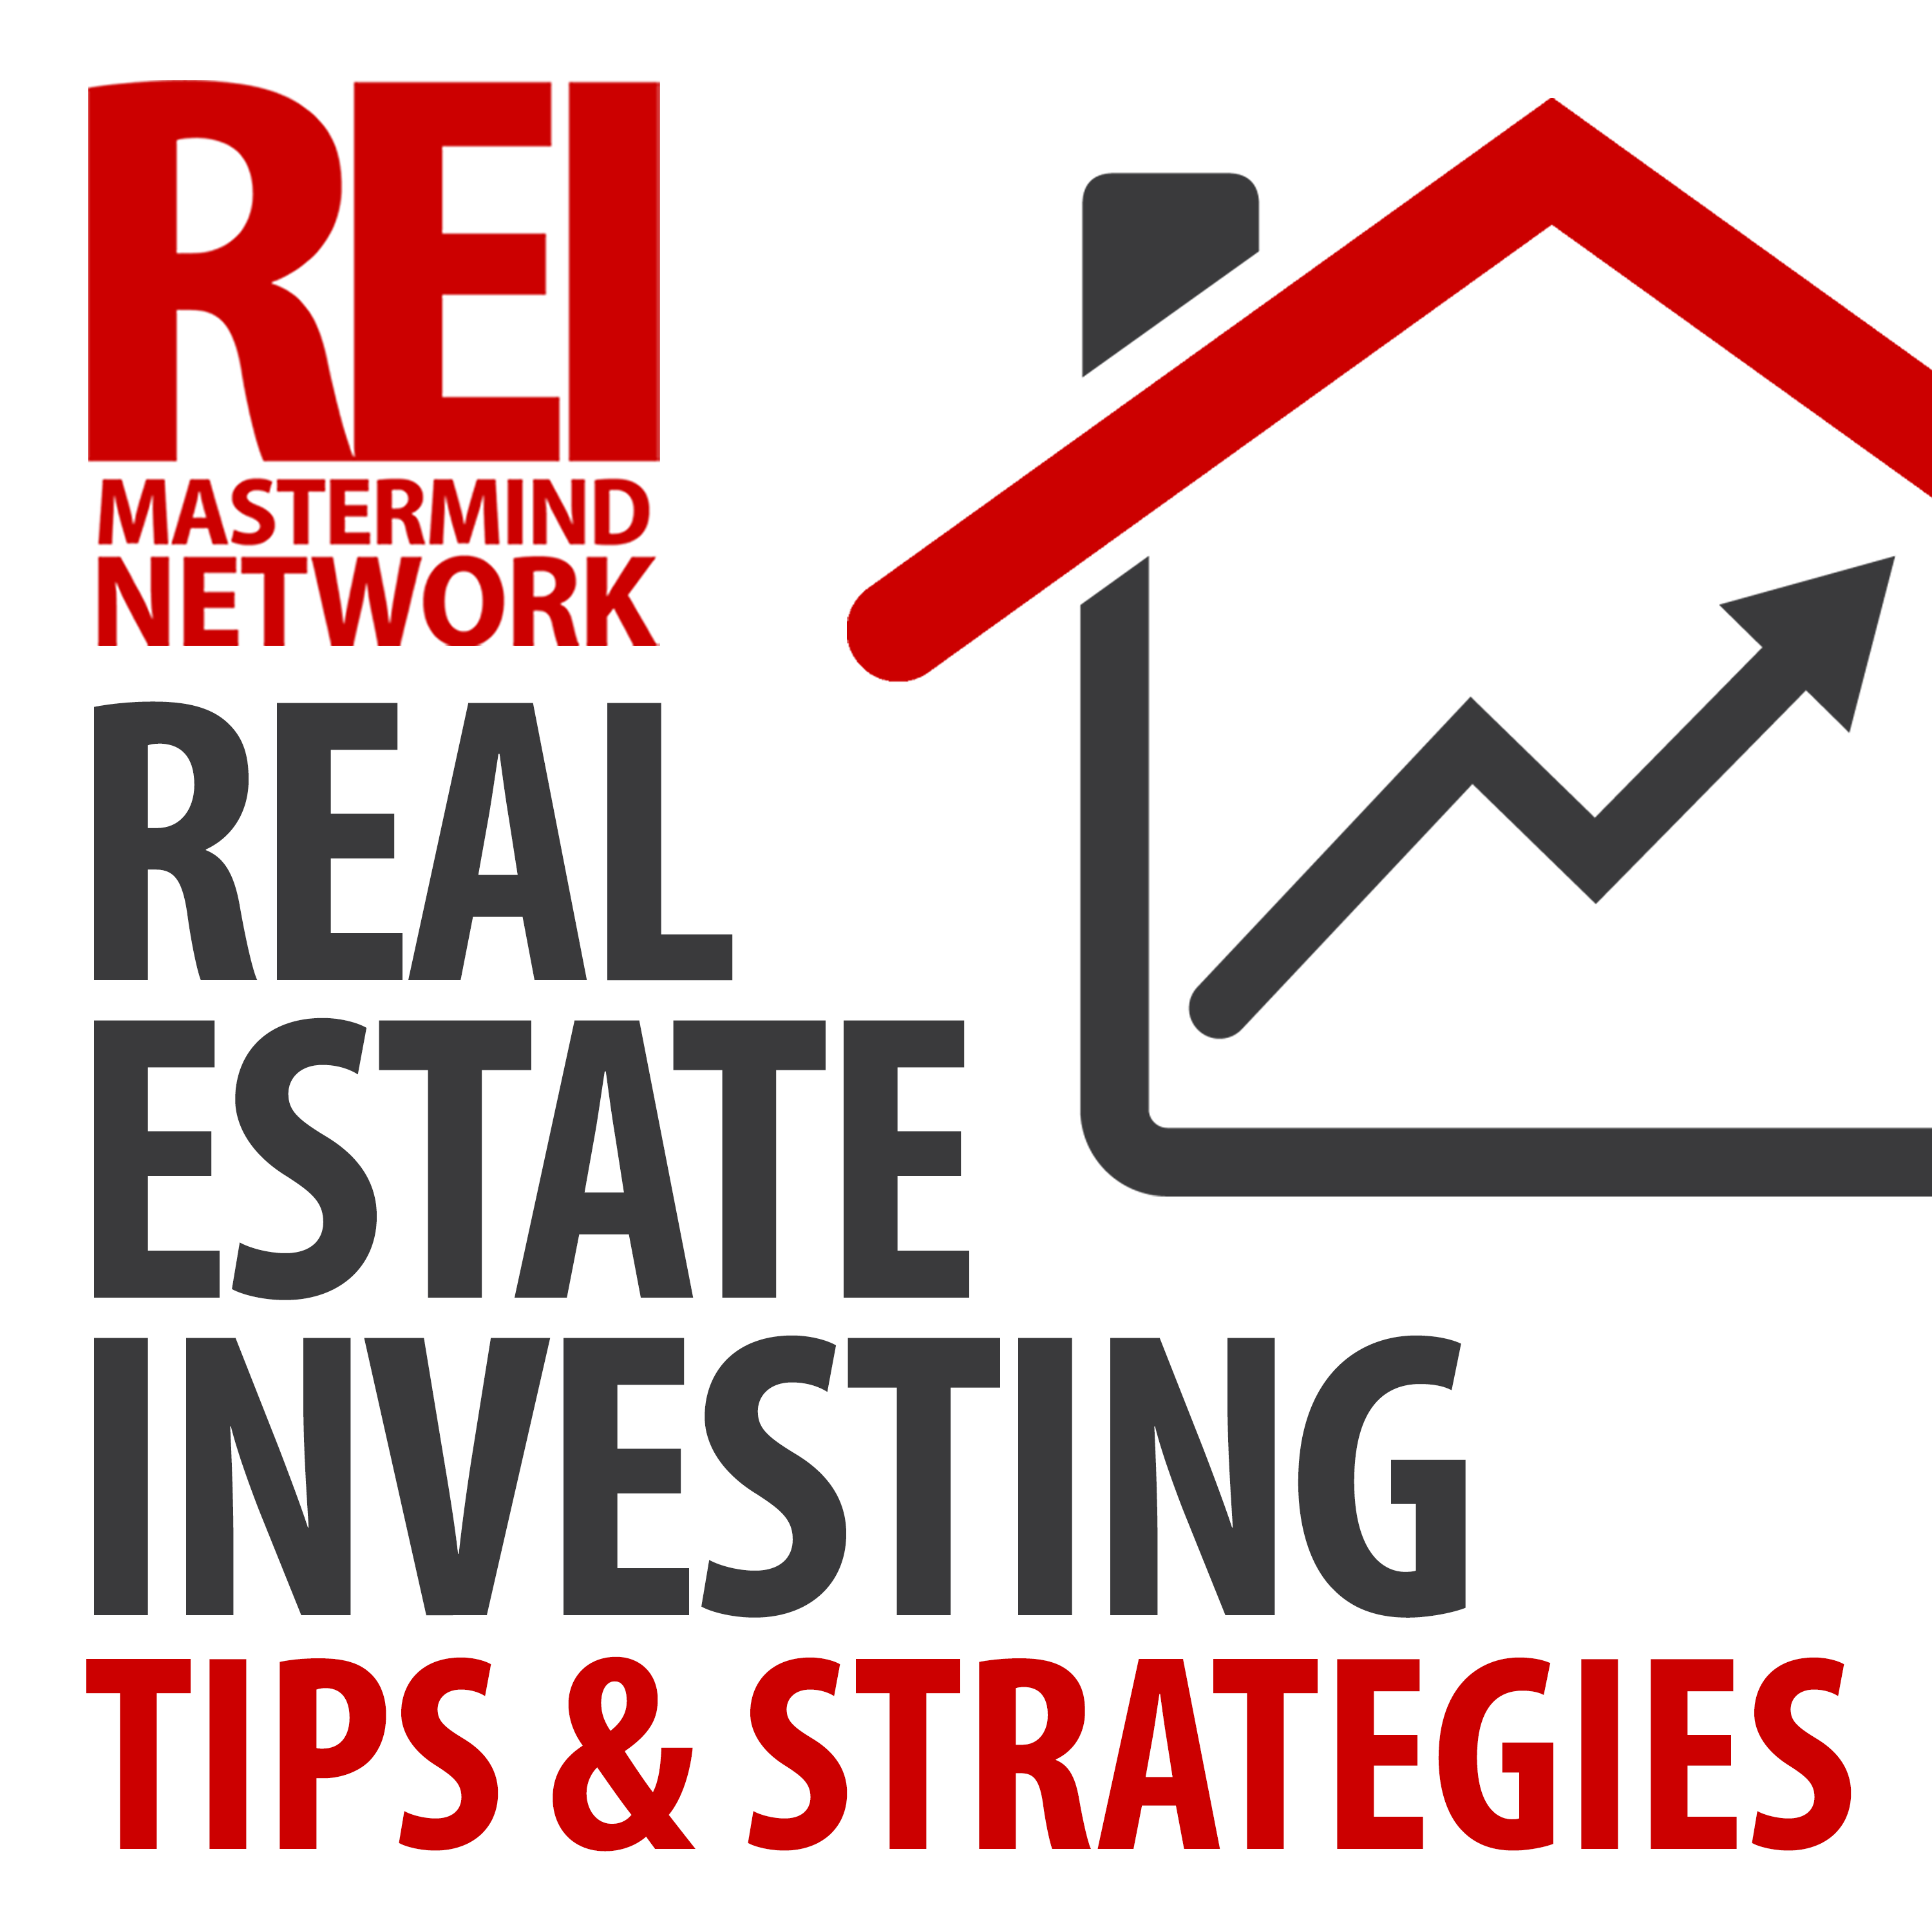 Join the REI Mastermind Network on Twitter